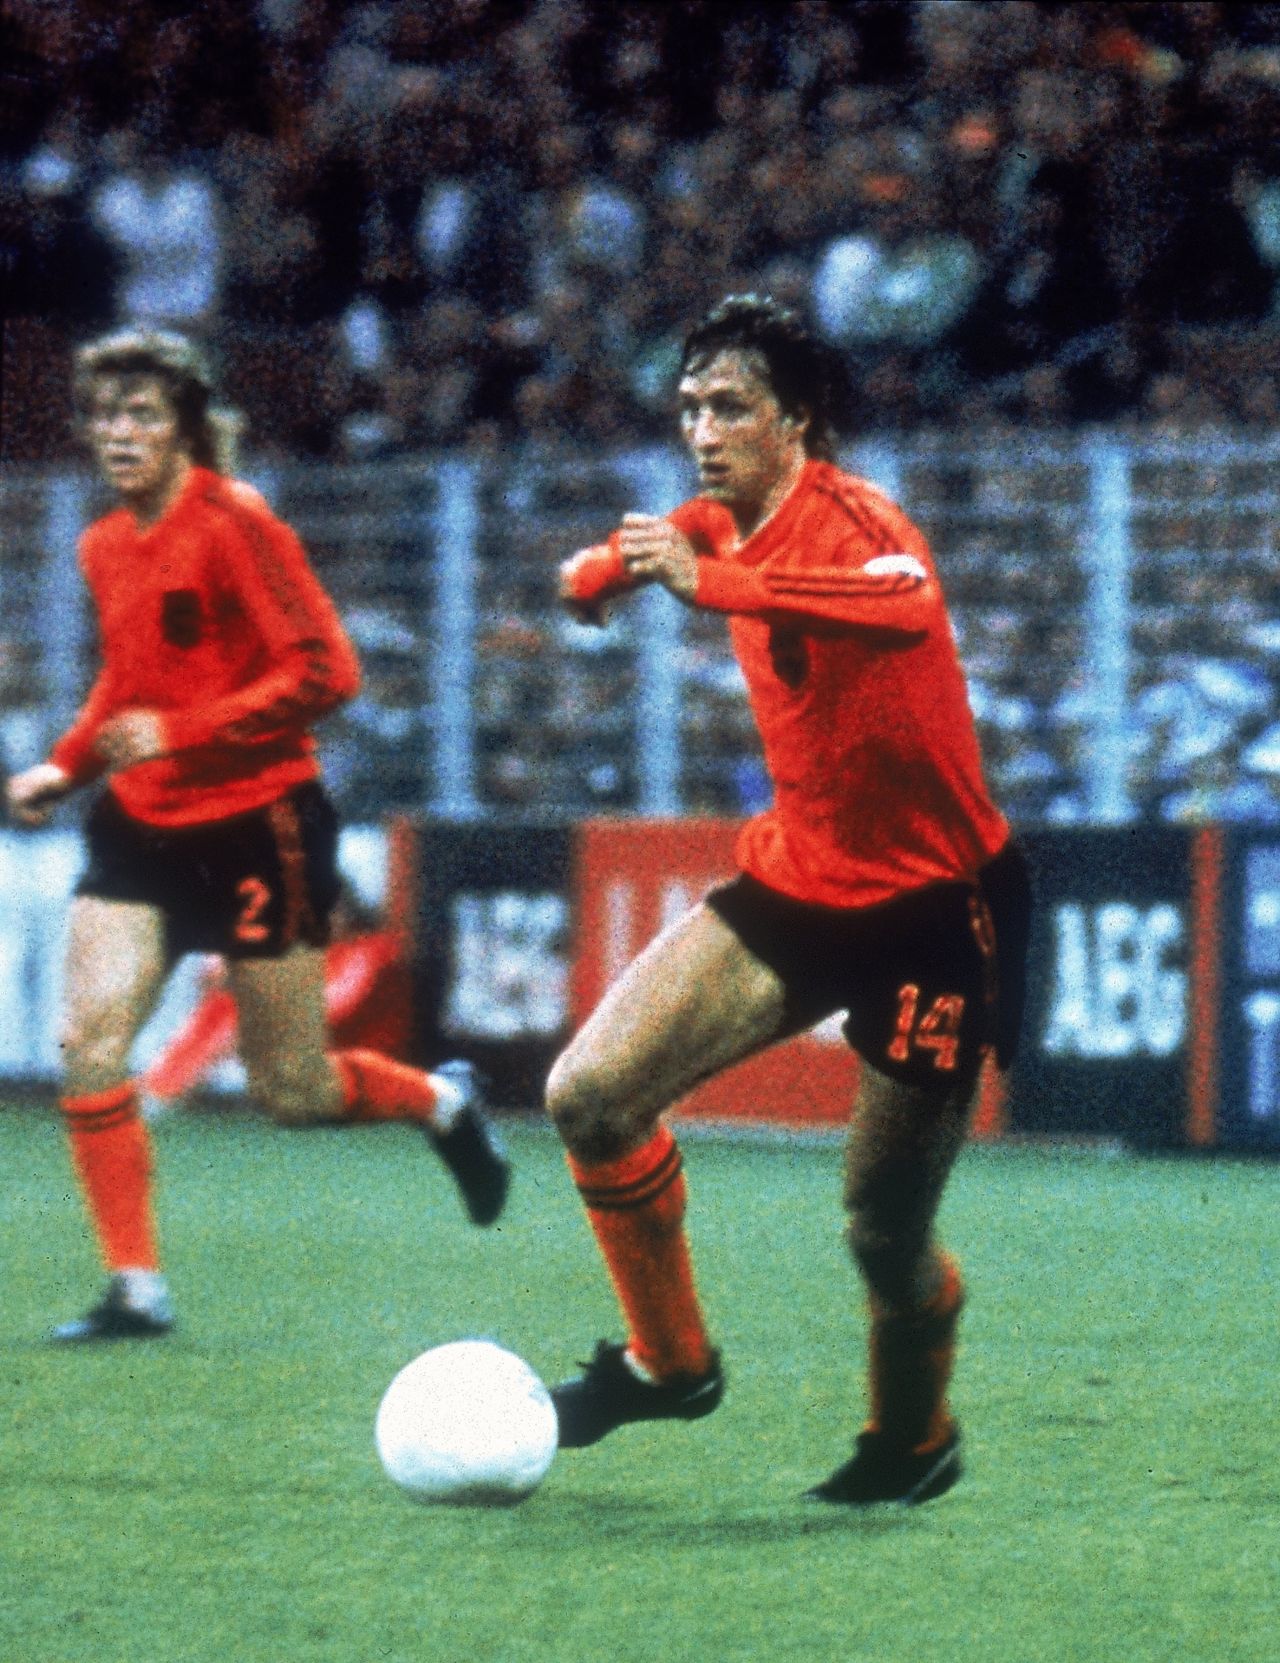 Johan Cruyff's influence on football cannot be underestimated. A part of the Netherlands side that was said to play "total football" he then instigated a similar style of play when he was coach at Spanish club Barcelona. The fruits of that labor are now reaping rewards for the Catalan club, and the national team, who followed their lead.